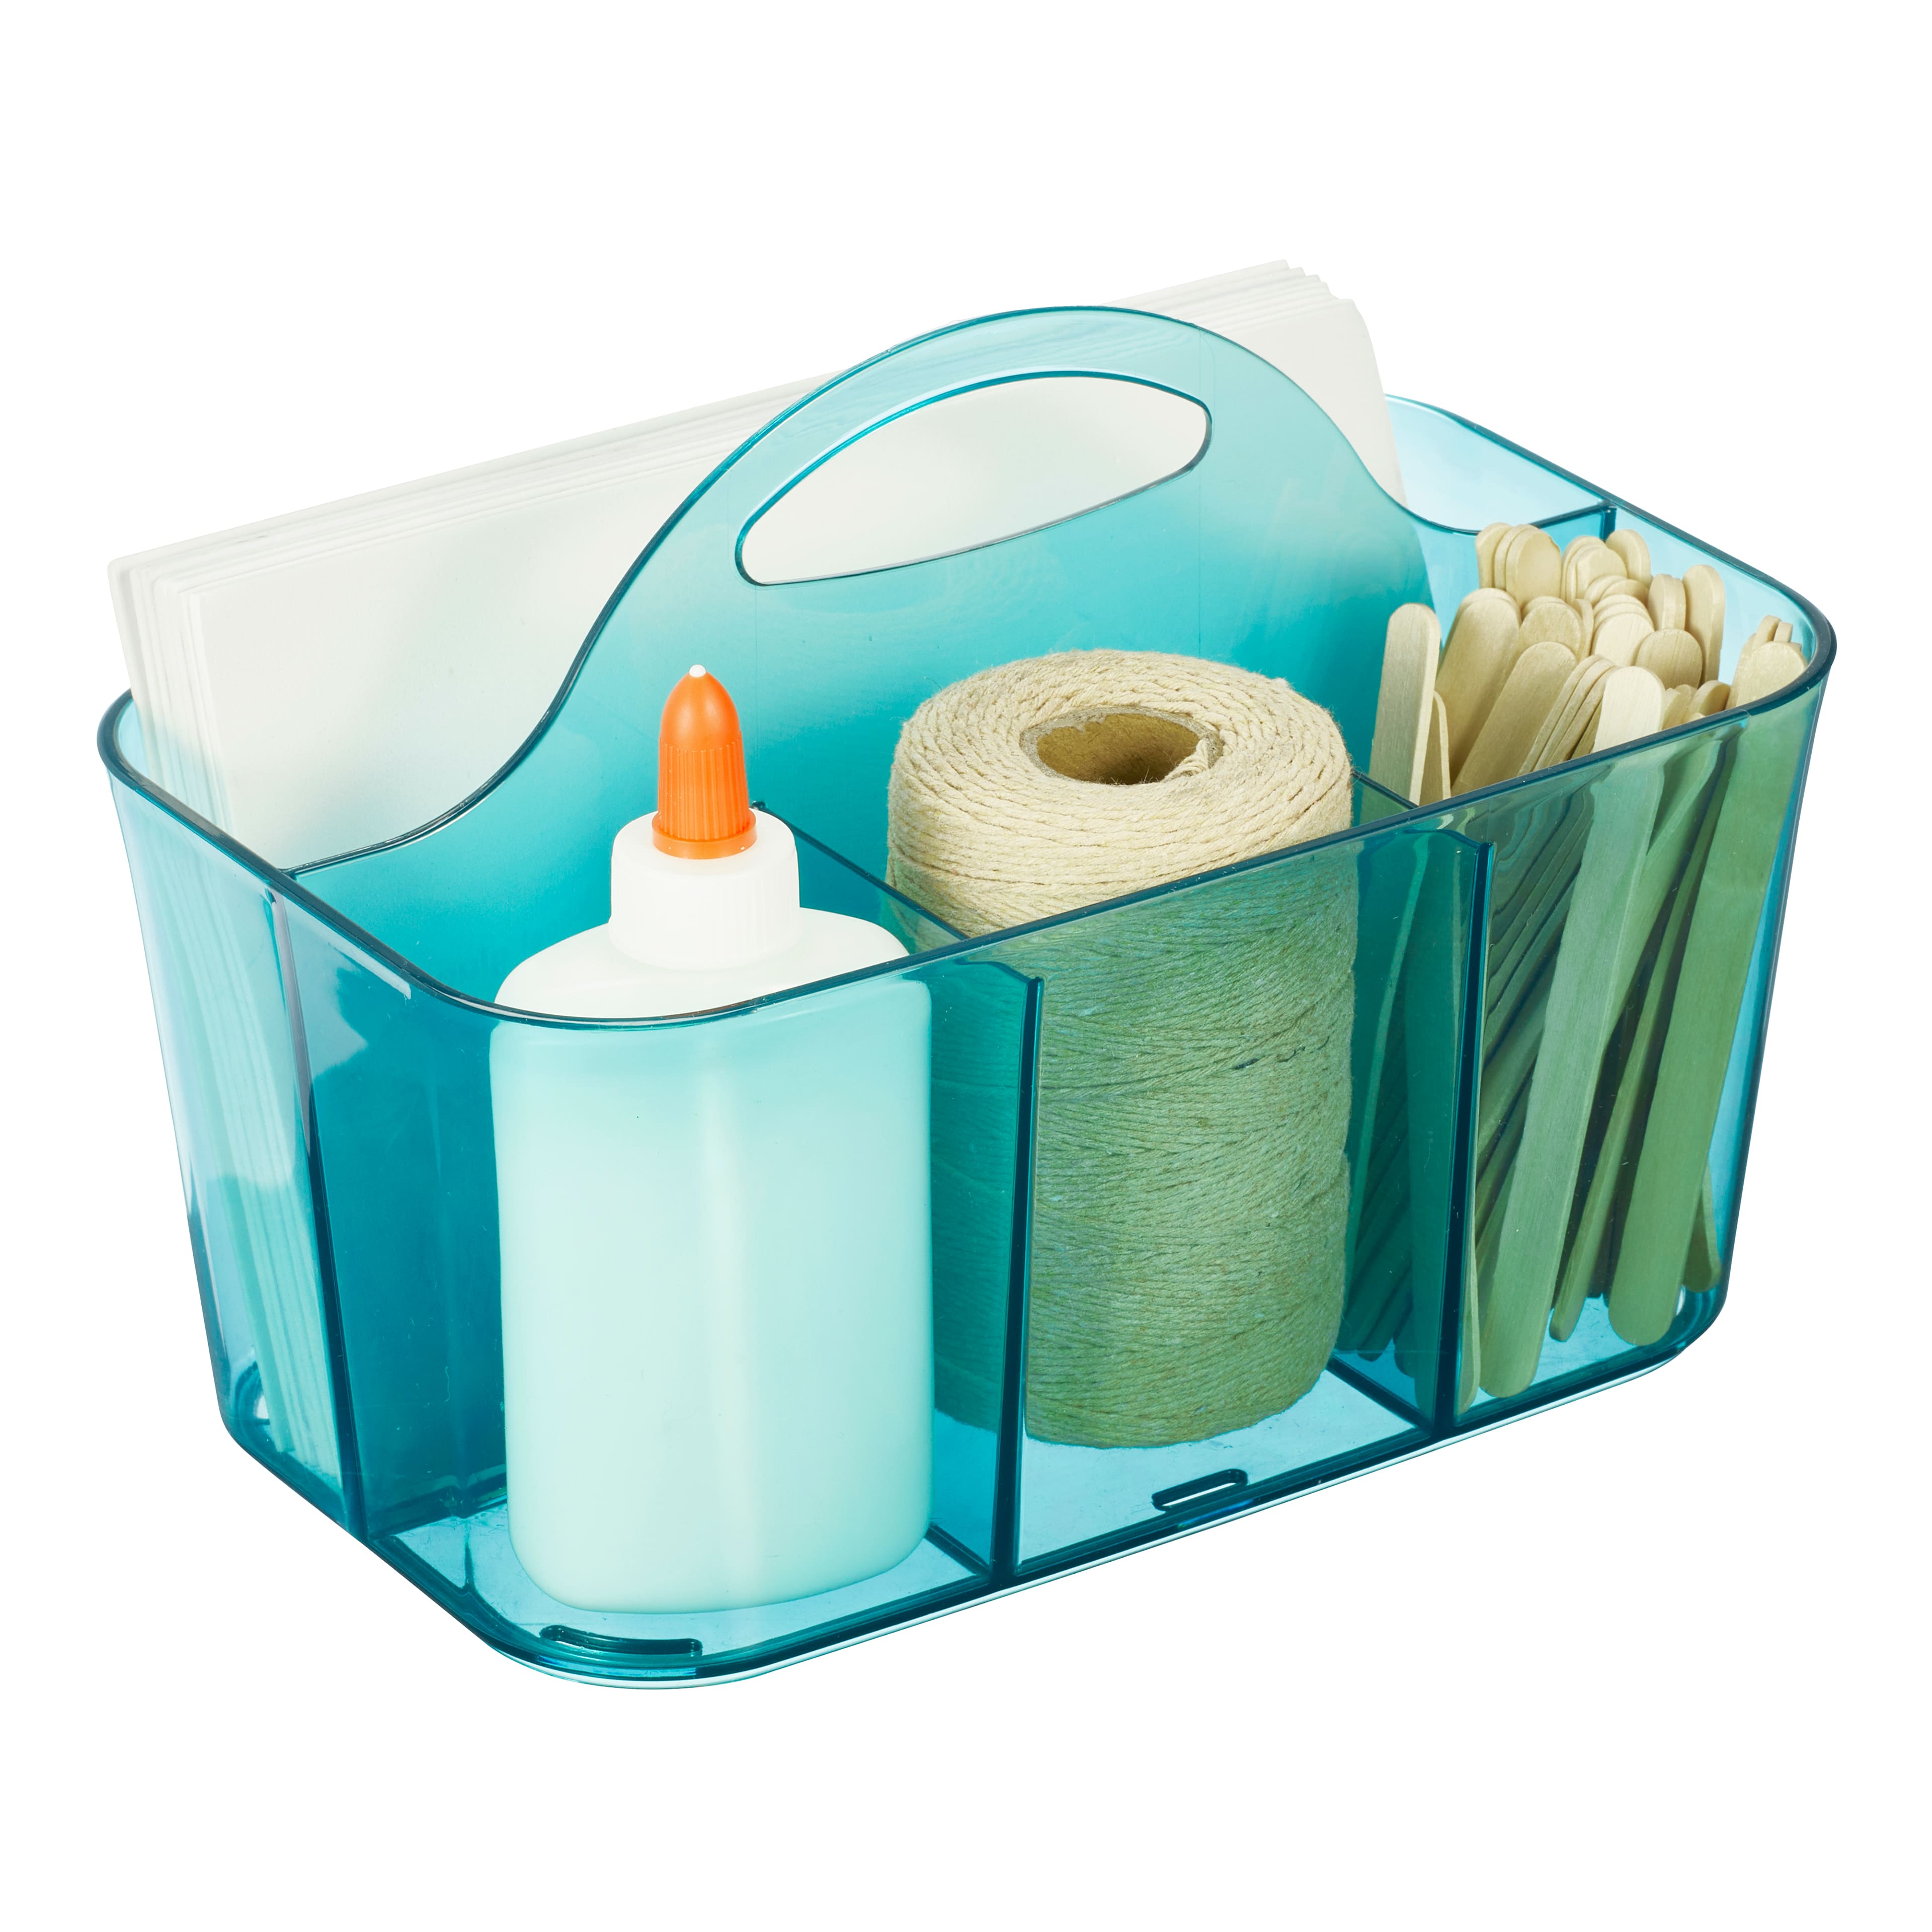 Mdesign Aqua Tint 4-Section Craft Caddy With Handle | Michaels